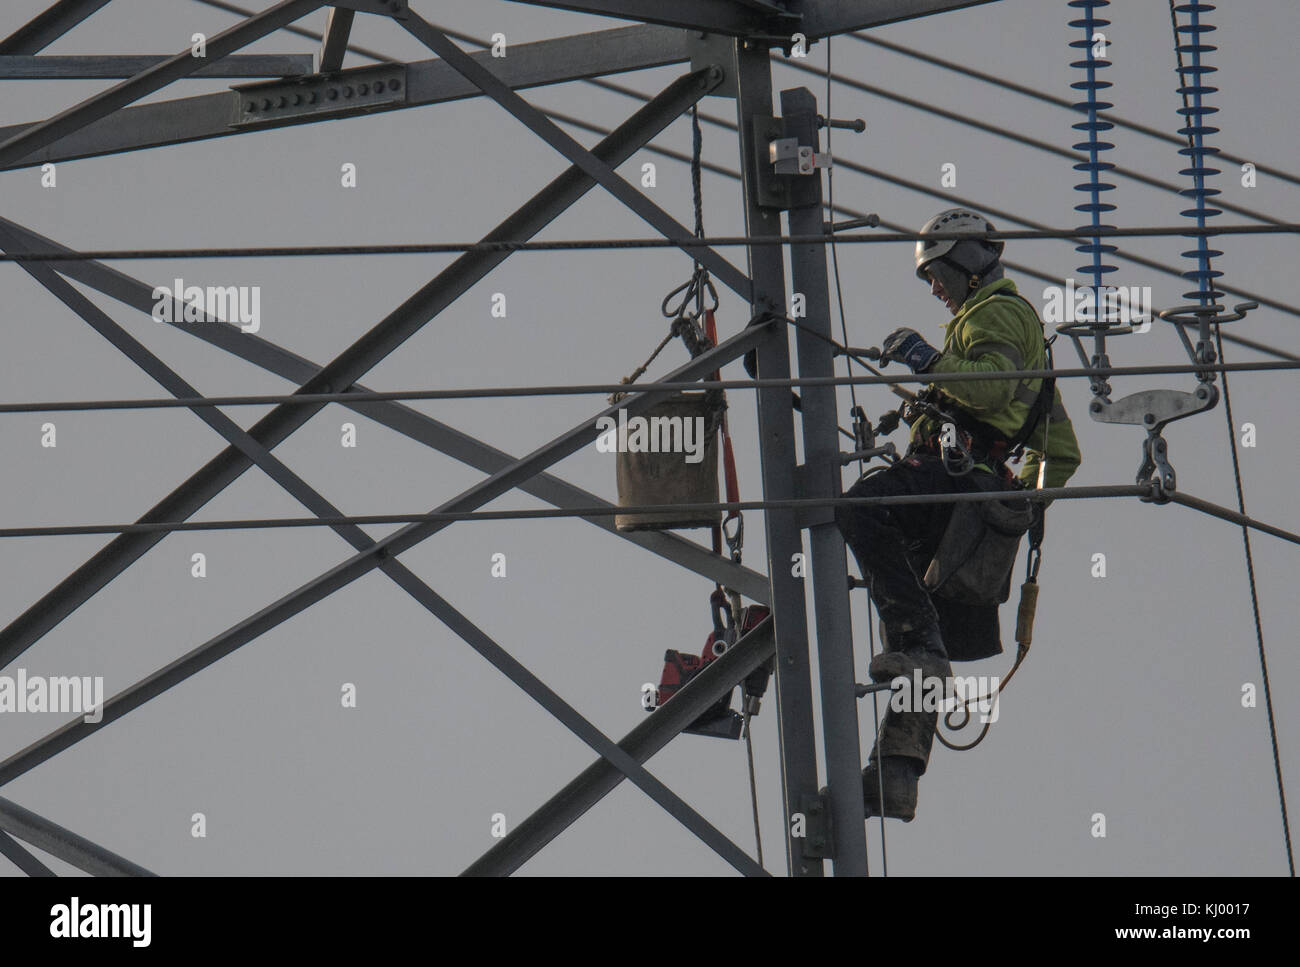 Frankfurt am Main, Germany. 22nd Nov, 2017. A technician works on a section of the transmission line near Frankfurt am Main, Germany, 22 November 2017. He climbed up the power pole in order to do maintenance work. Credit: Boris Roessler/dpa/Alamy Live News Stock Photo